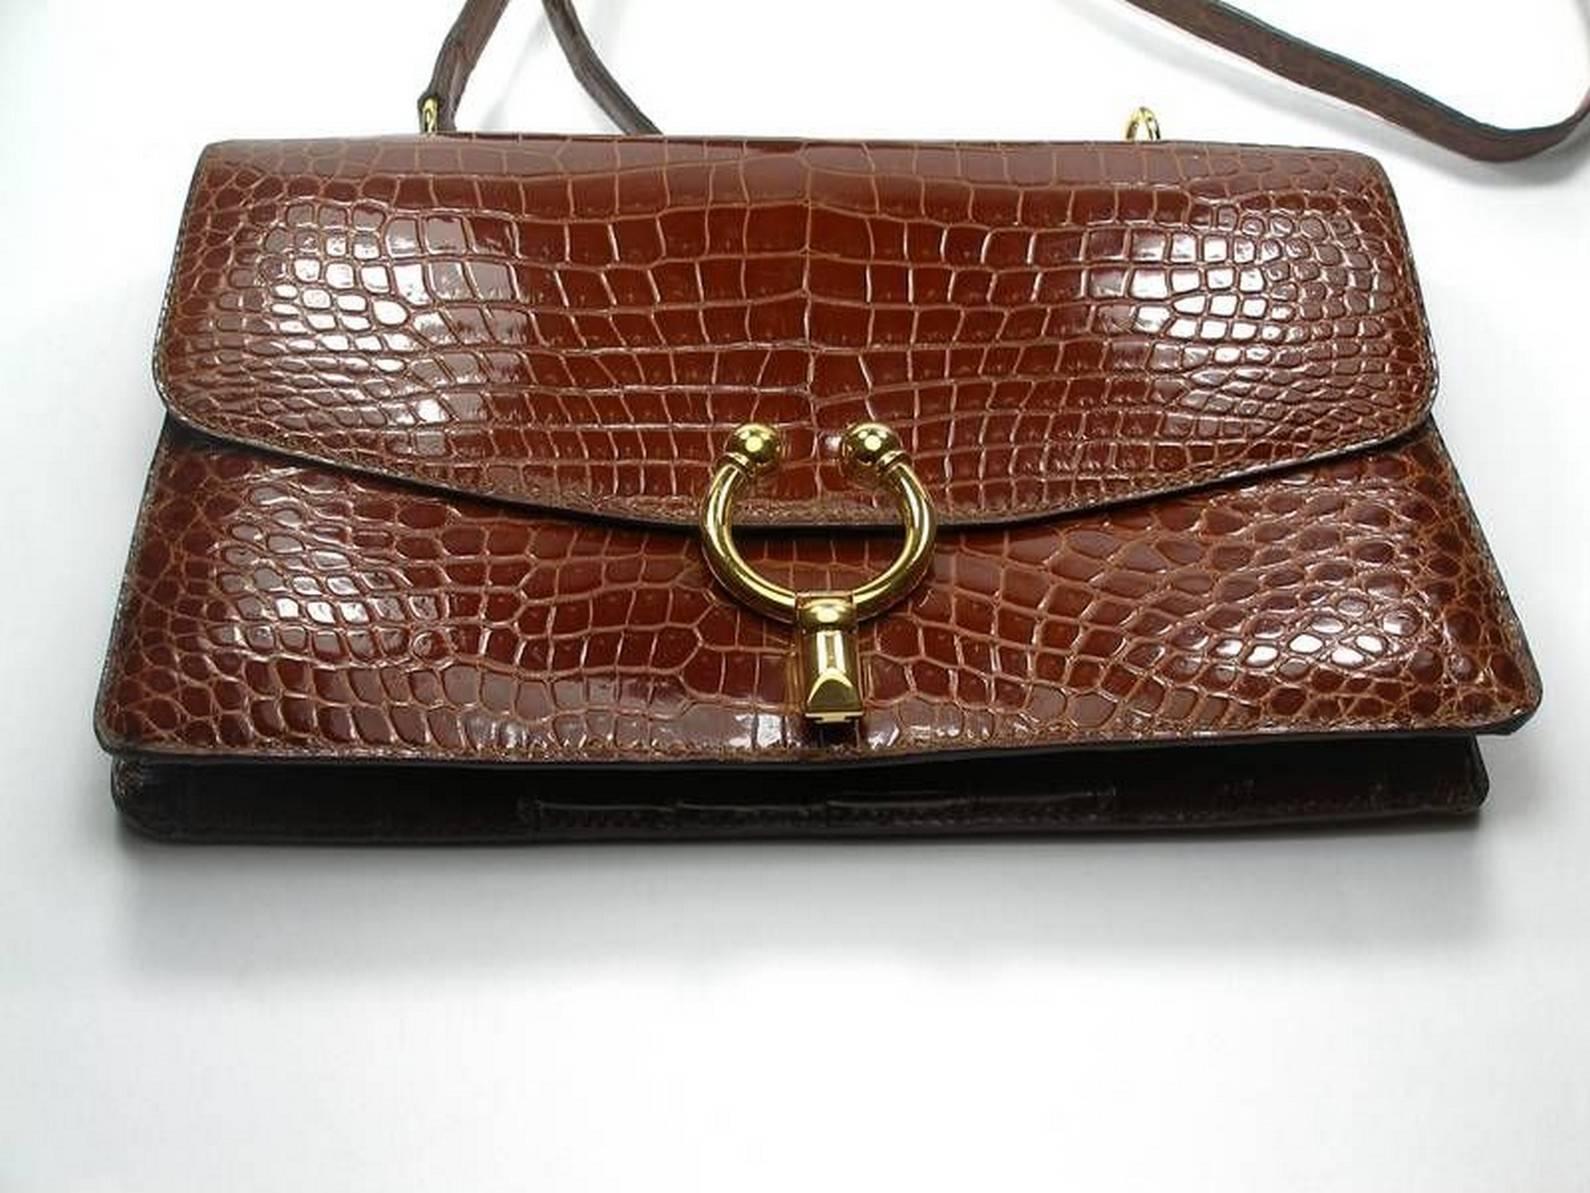 WON-DER-FULL Vintage Croc bag 
NO BRAND 
Year 1960/1965 
Made in france 
Color : cognac 
Gold plated hadware
Strap : 95 cm or 37.4 inches
Customs fees and vat are included
Thank you for visiting my shop !